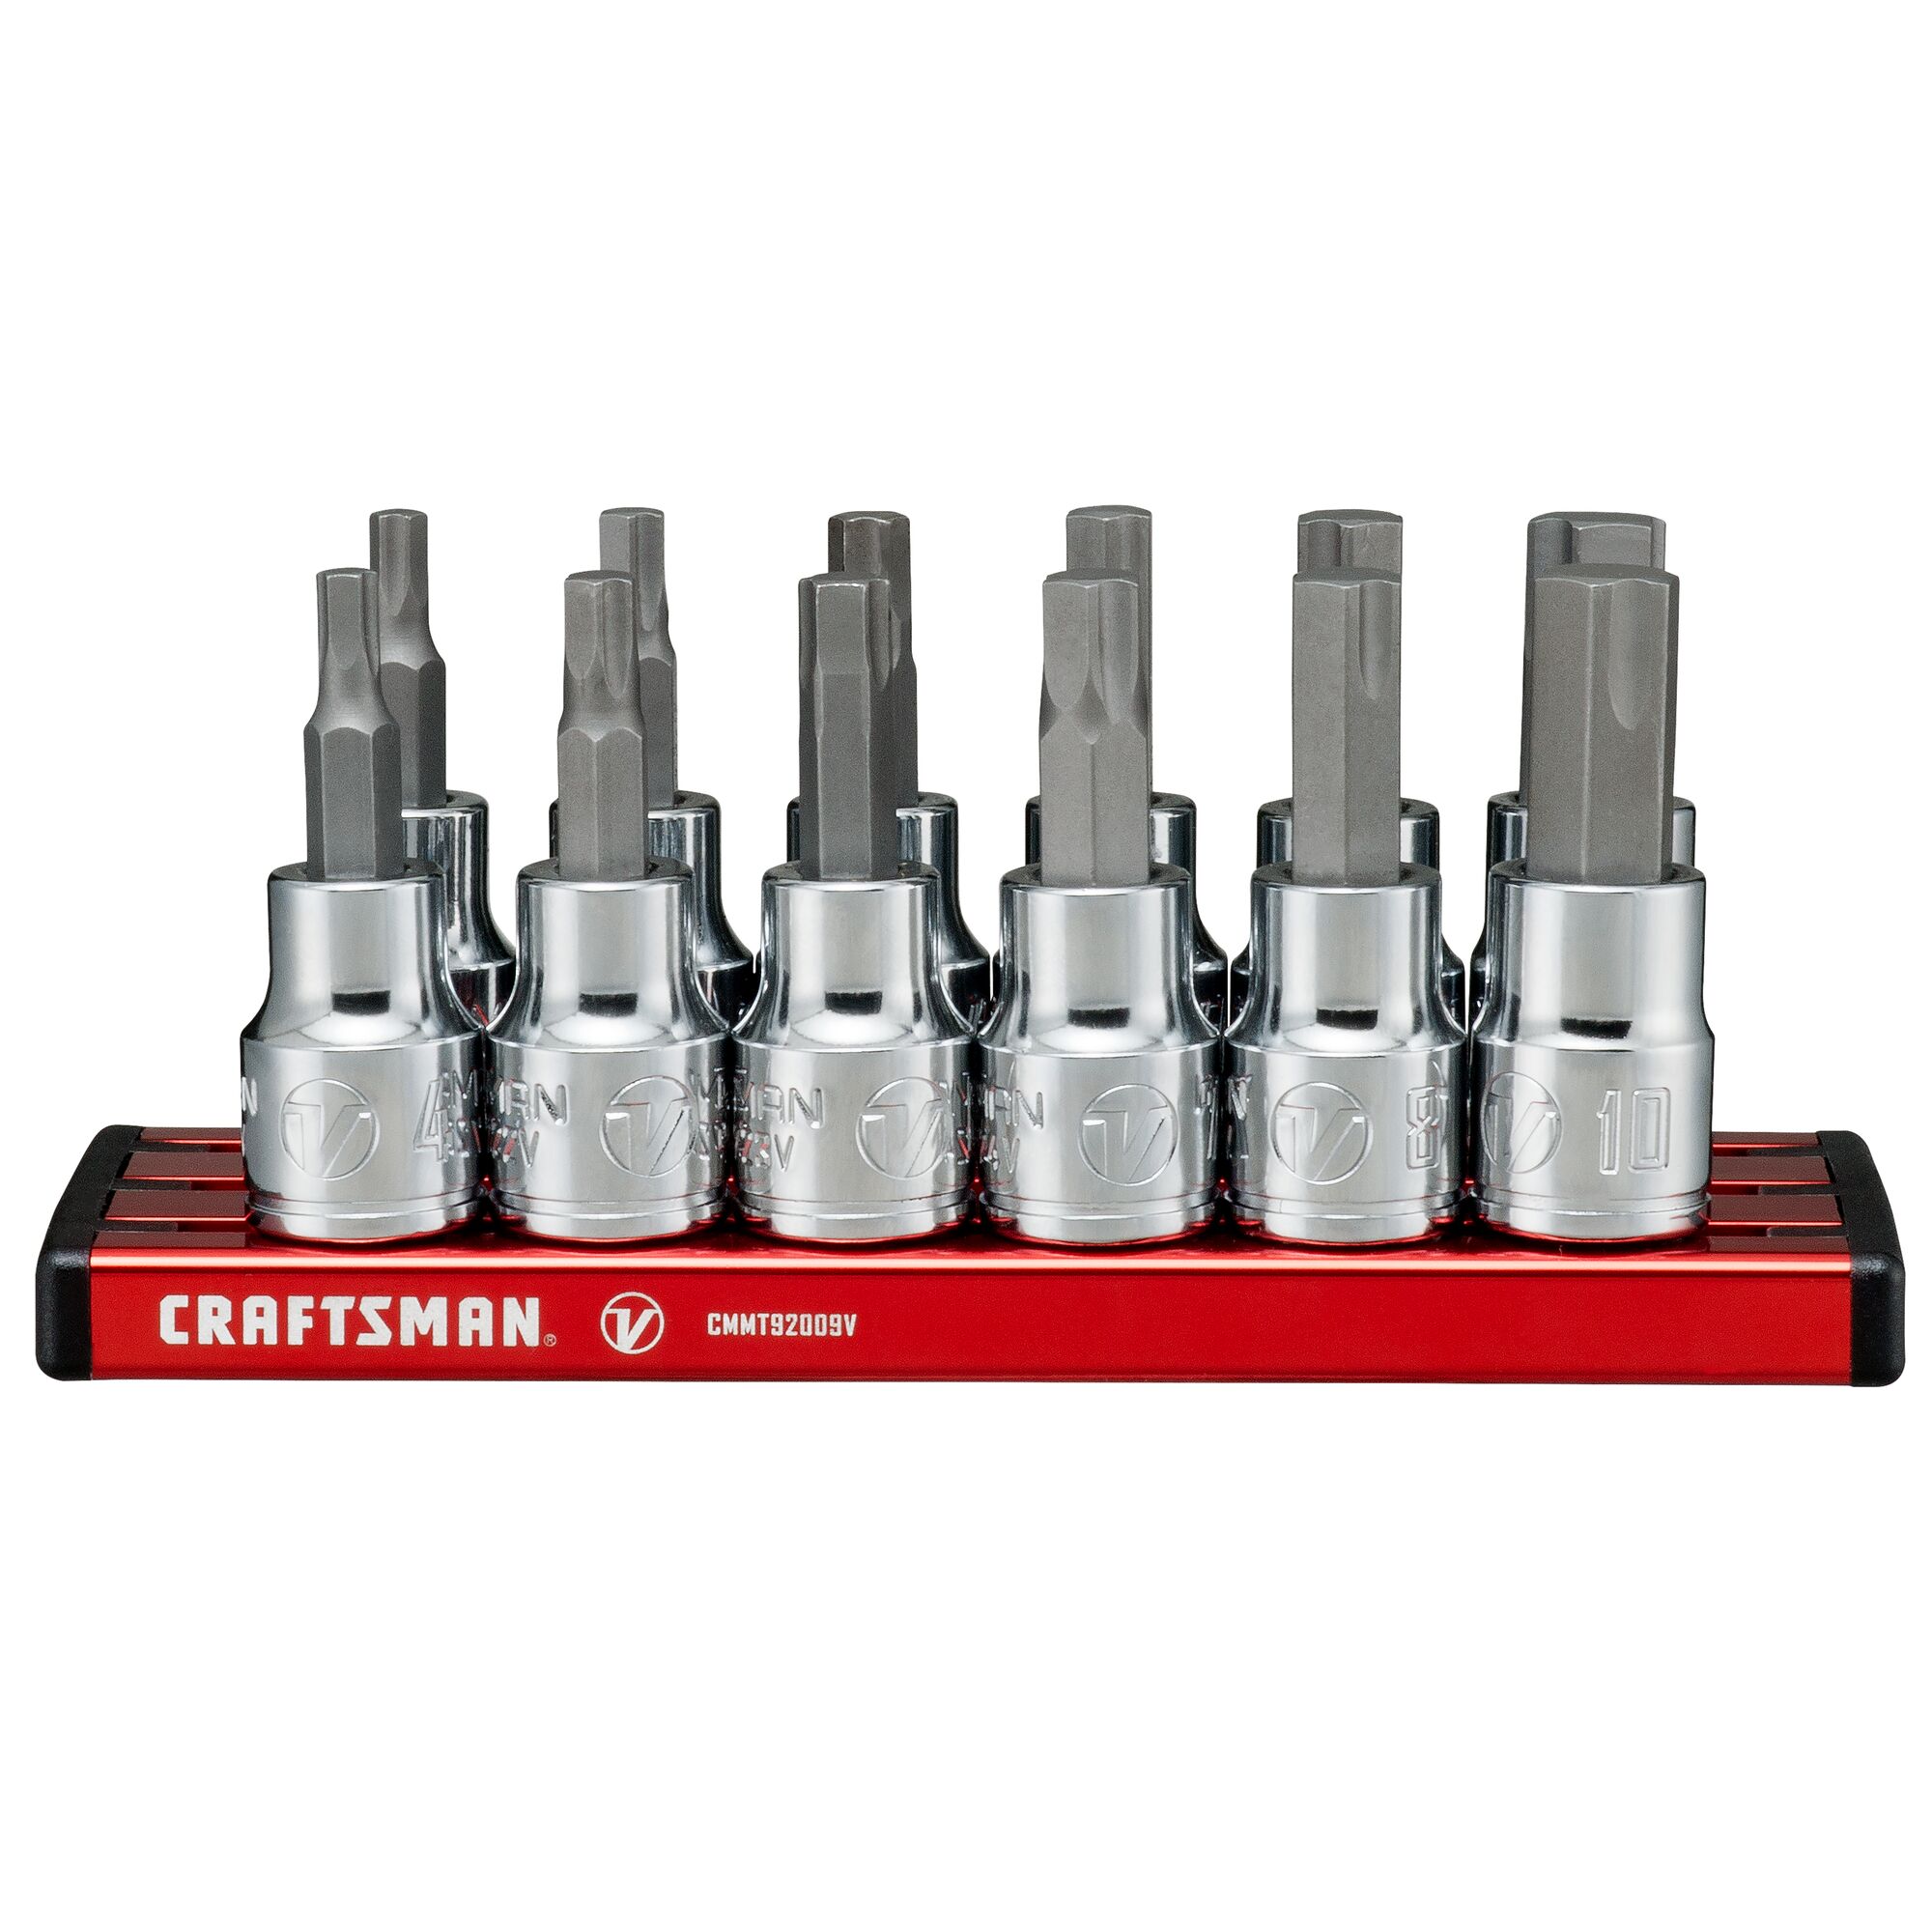 View of CRAFTSMAN Sockets: Hex on white background